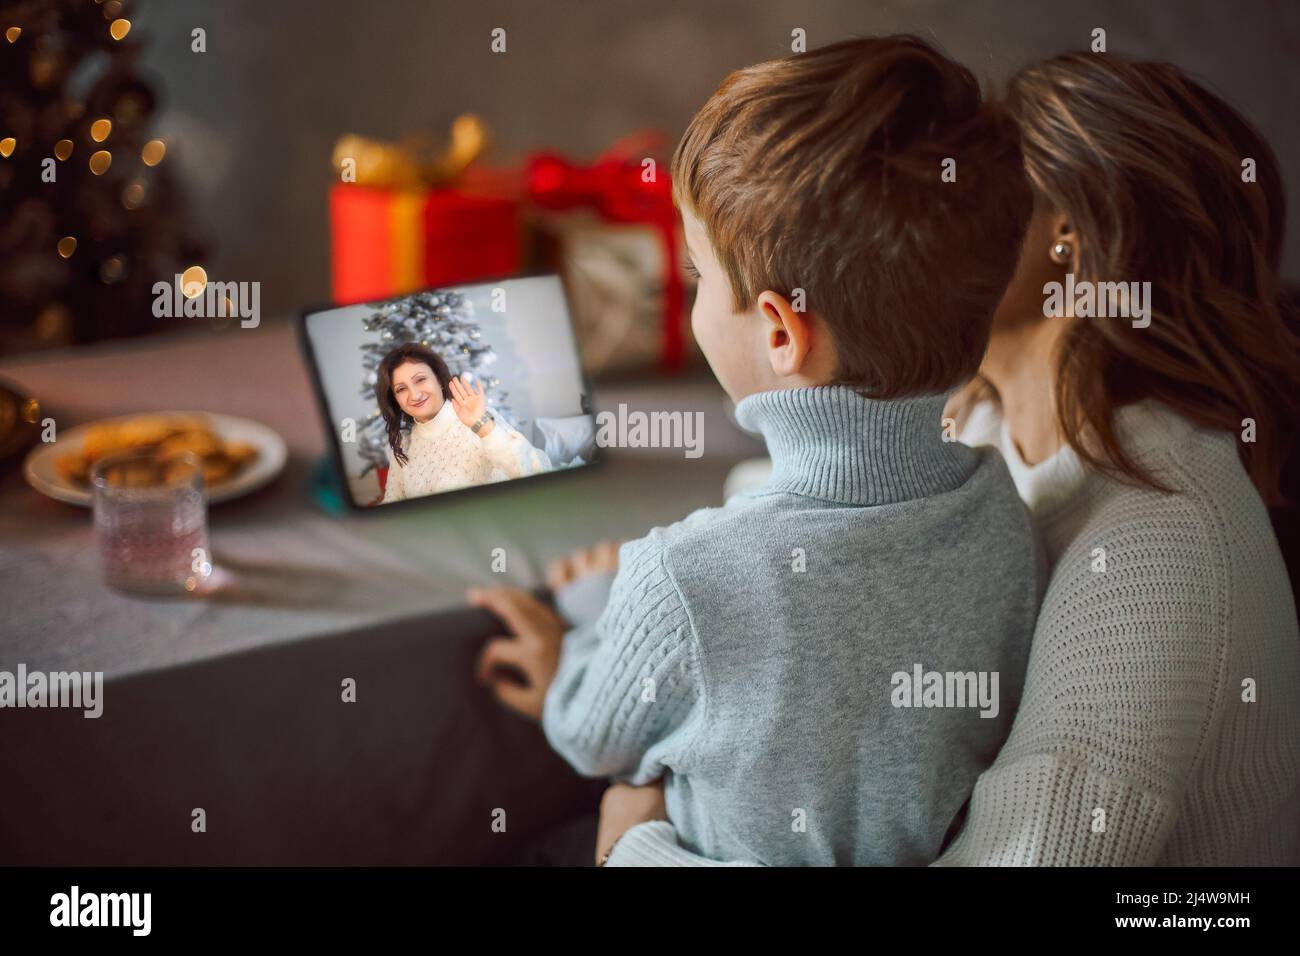 Happy young woman with little son, talking with friends on virtual zoom video call, celebrating new year party in holiday remote online conference cha Stock Photo